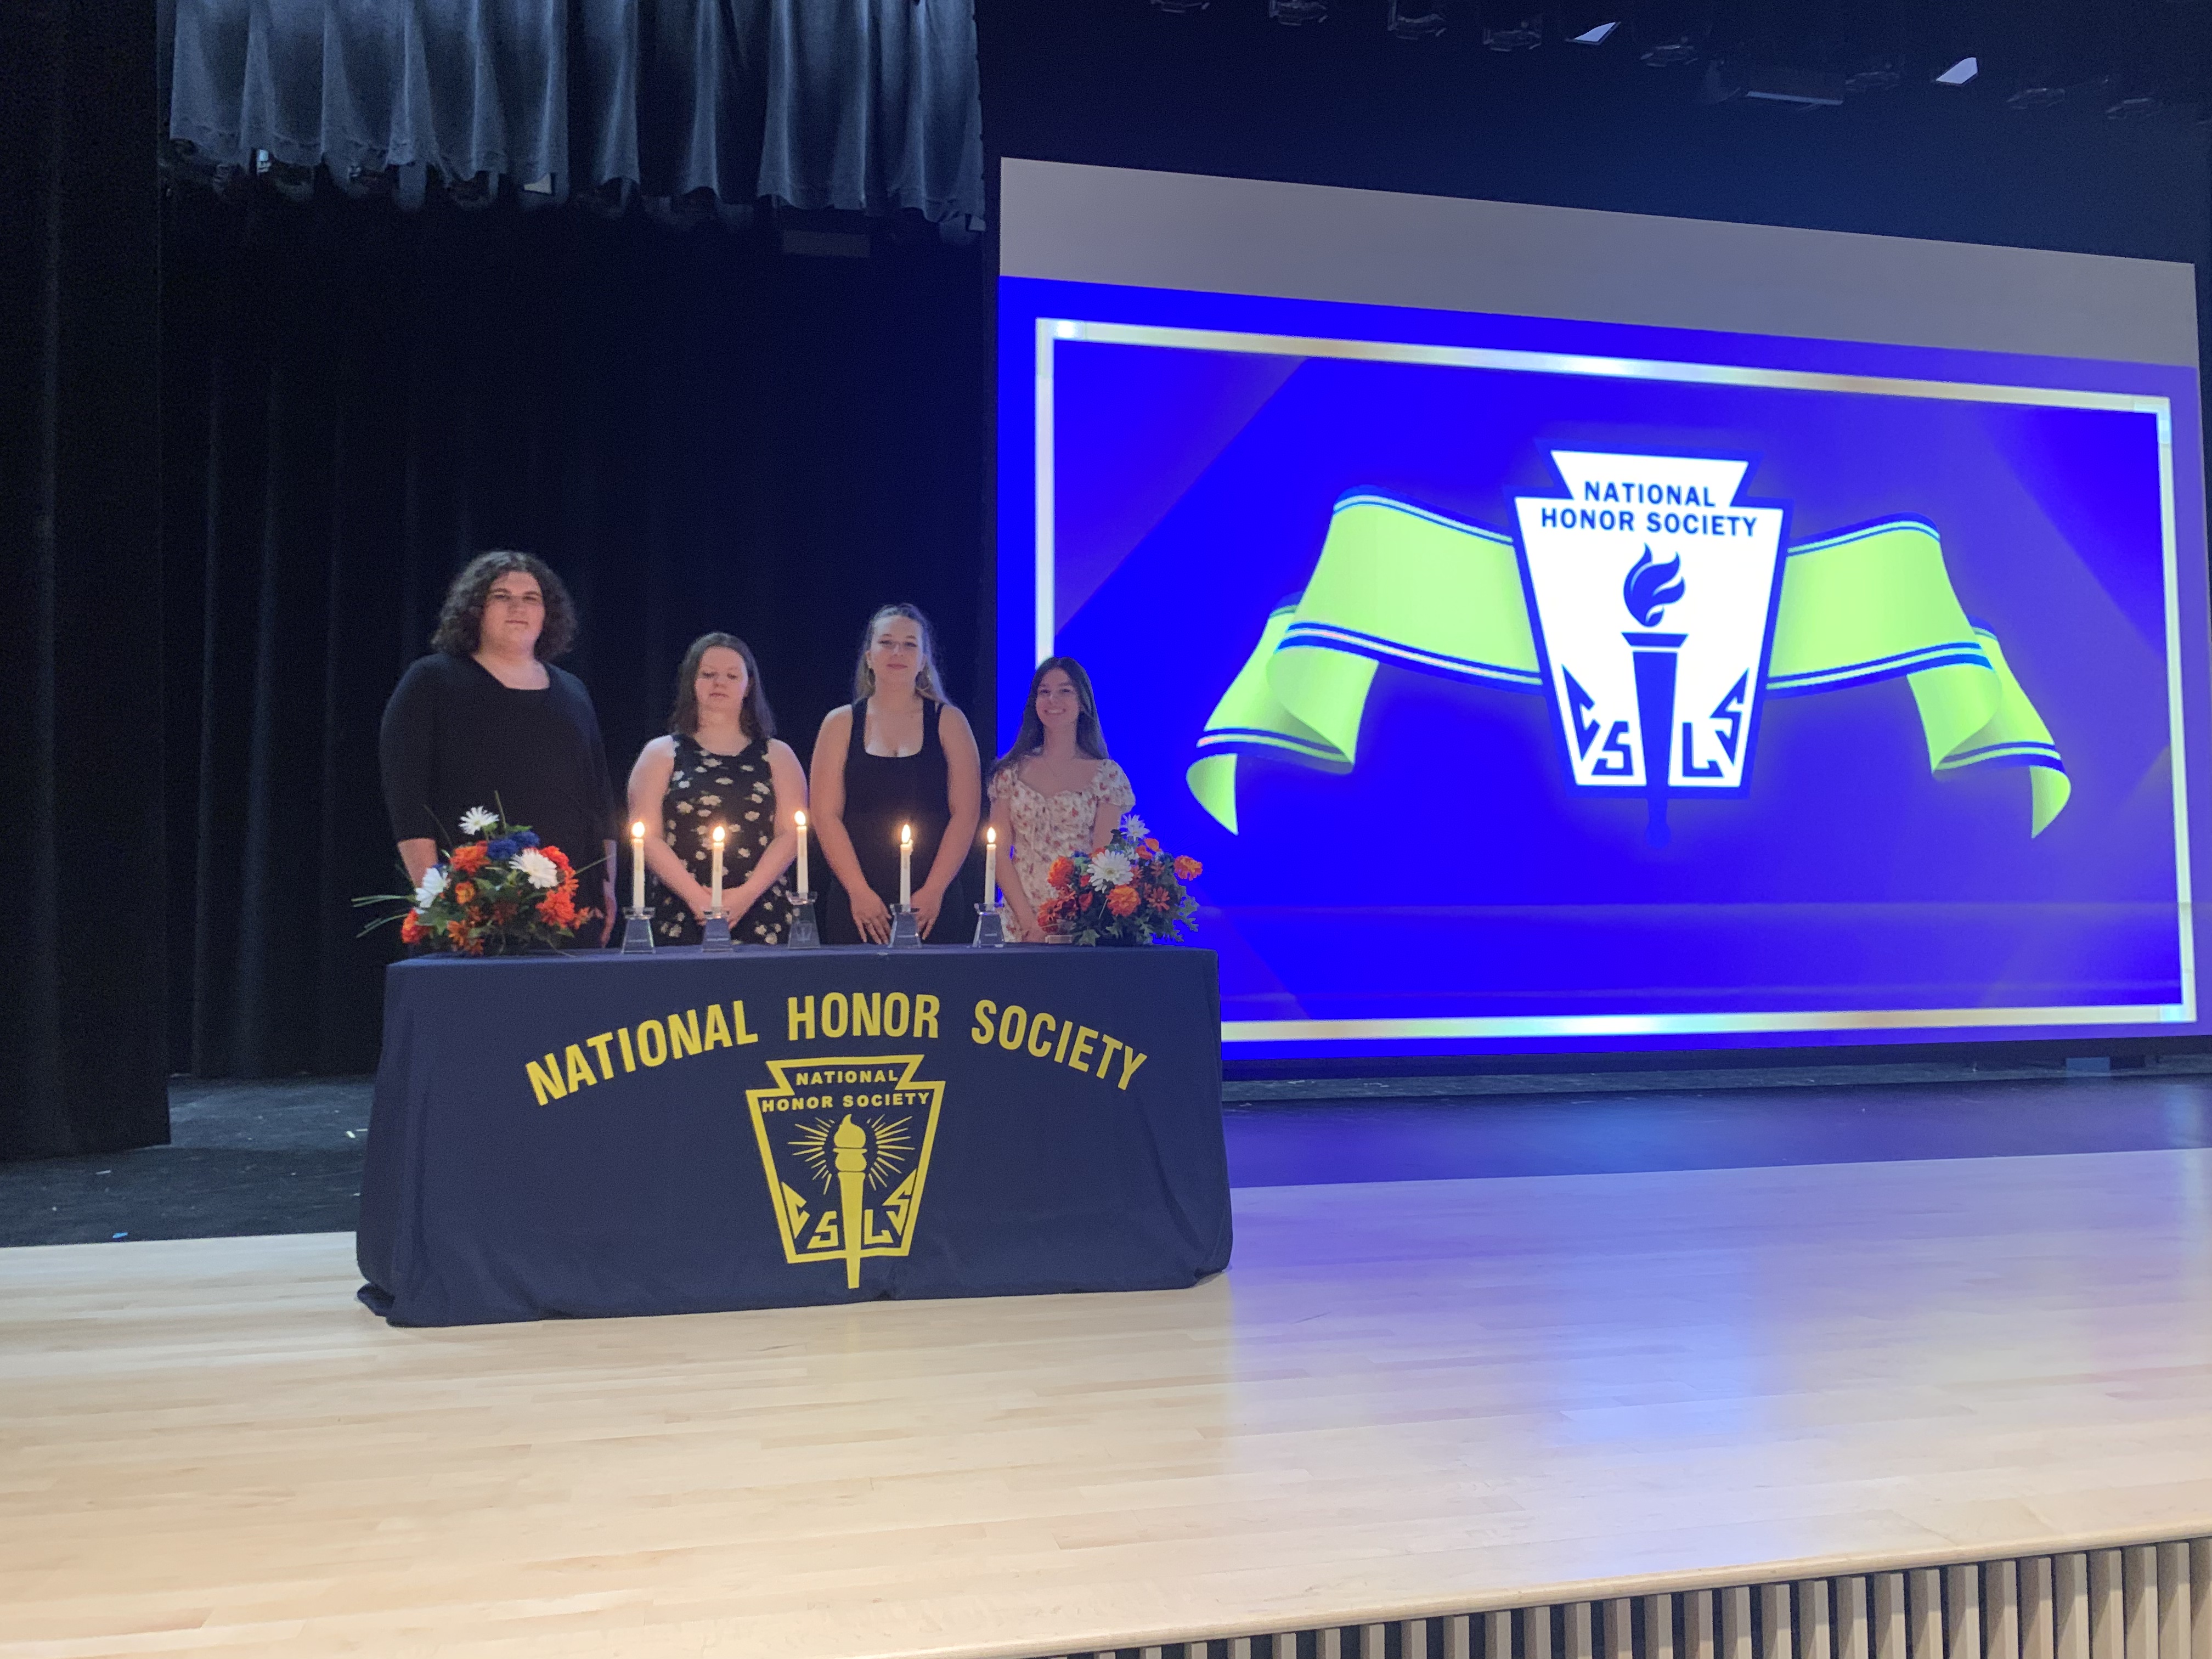 National Honor Society students pose for pictures on stage at Solvay High school